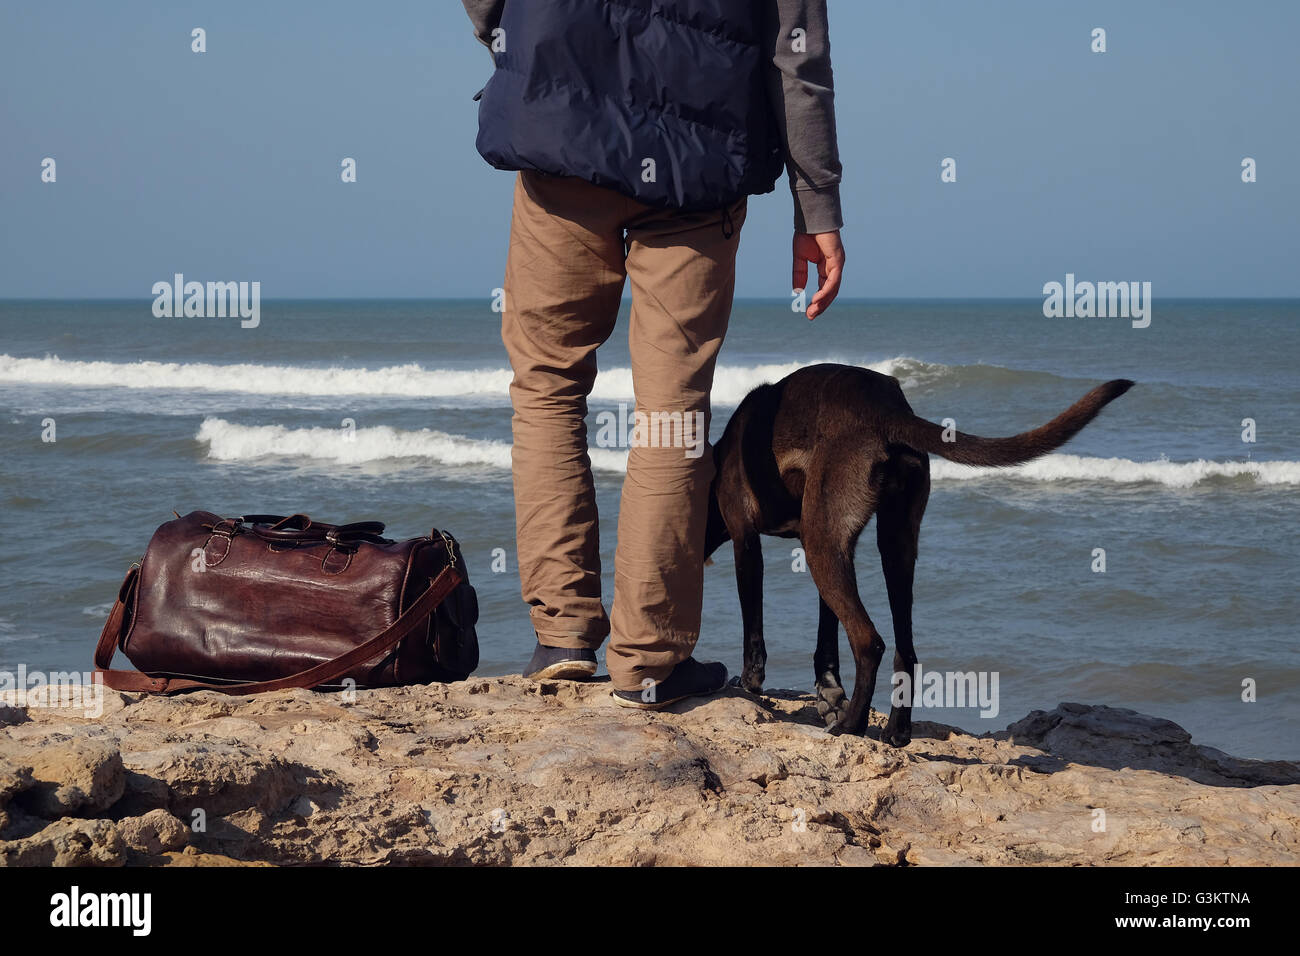 Rear waist down view of man and his dog on rocks by sea, Russia Stock Photo